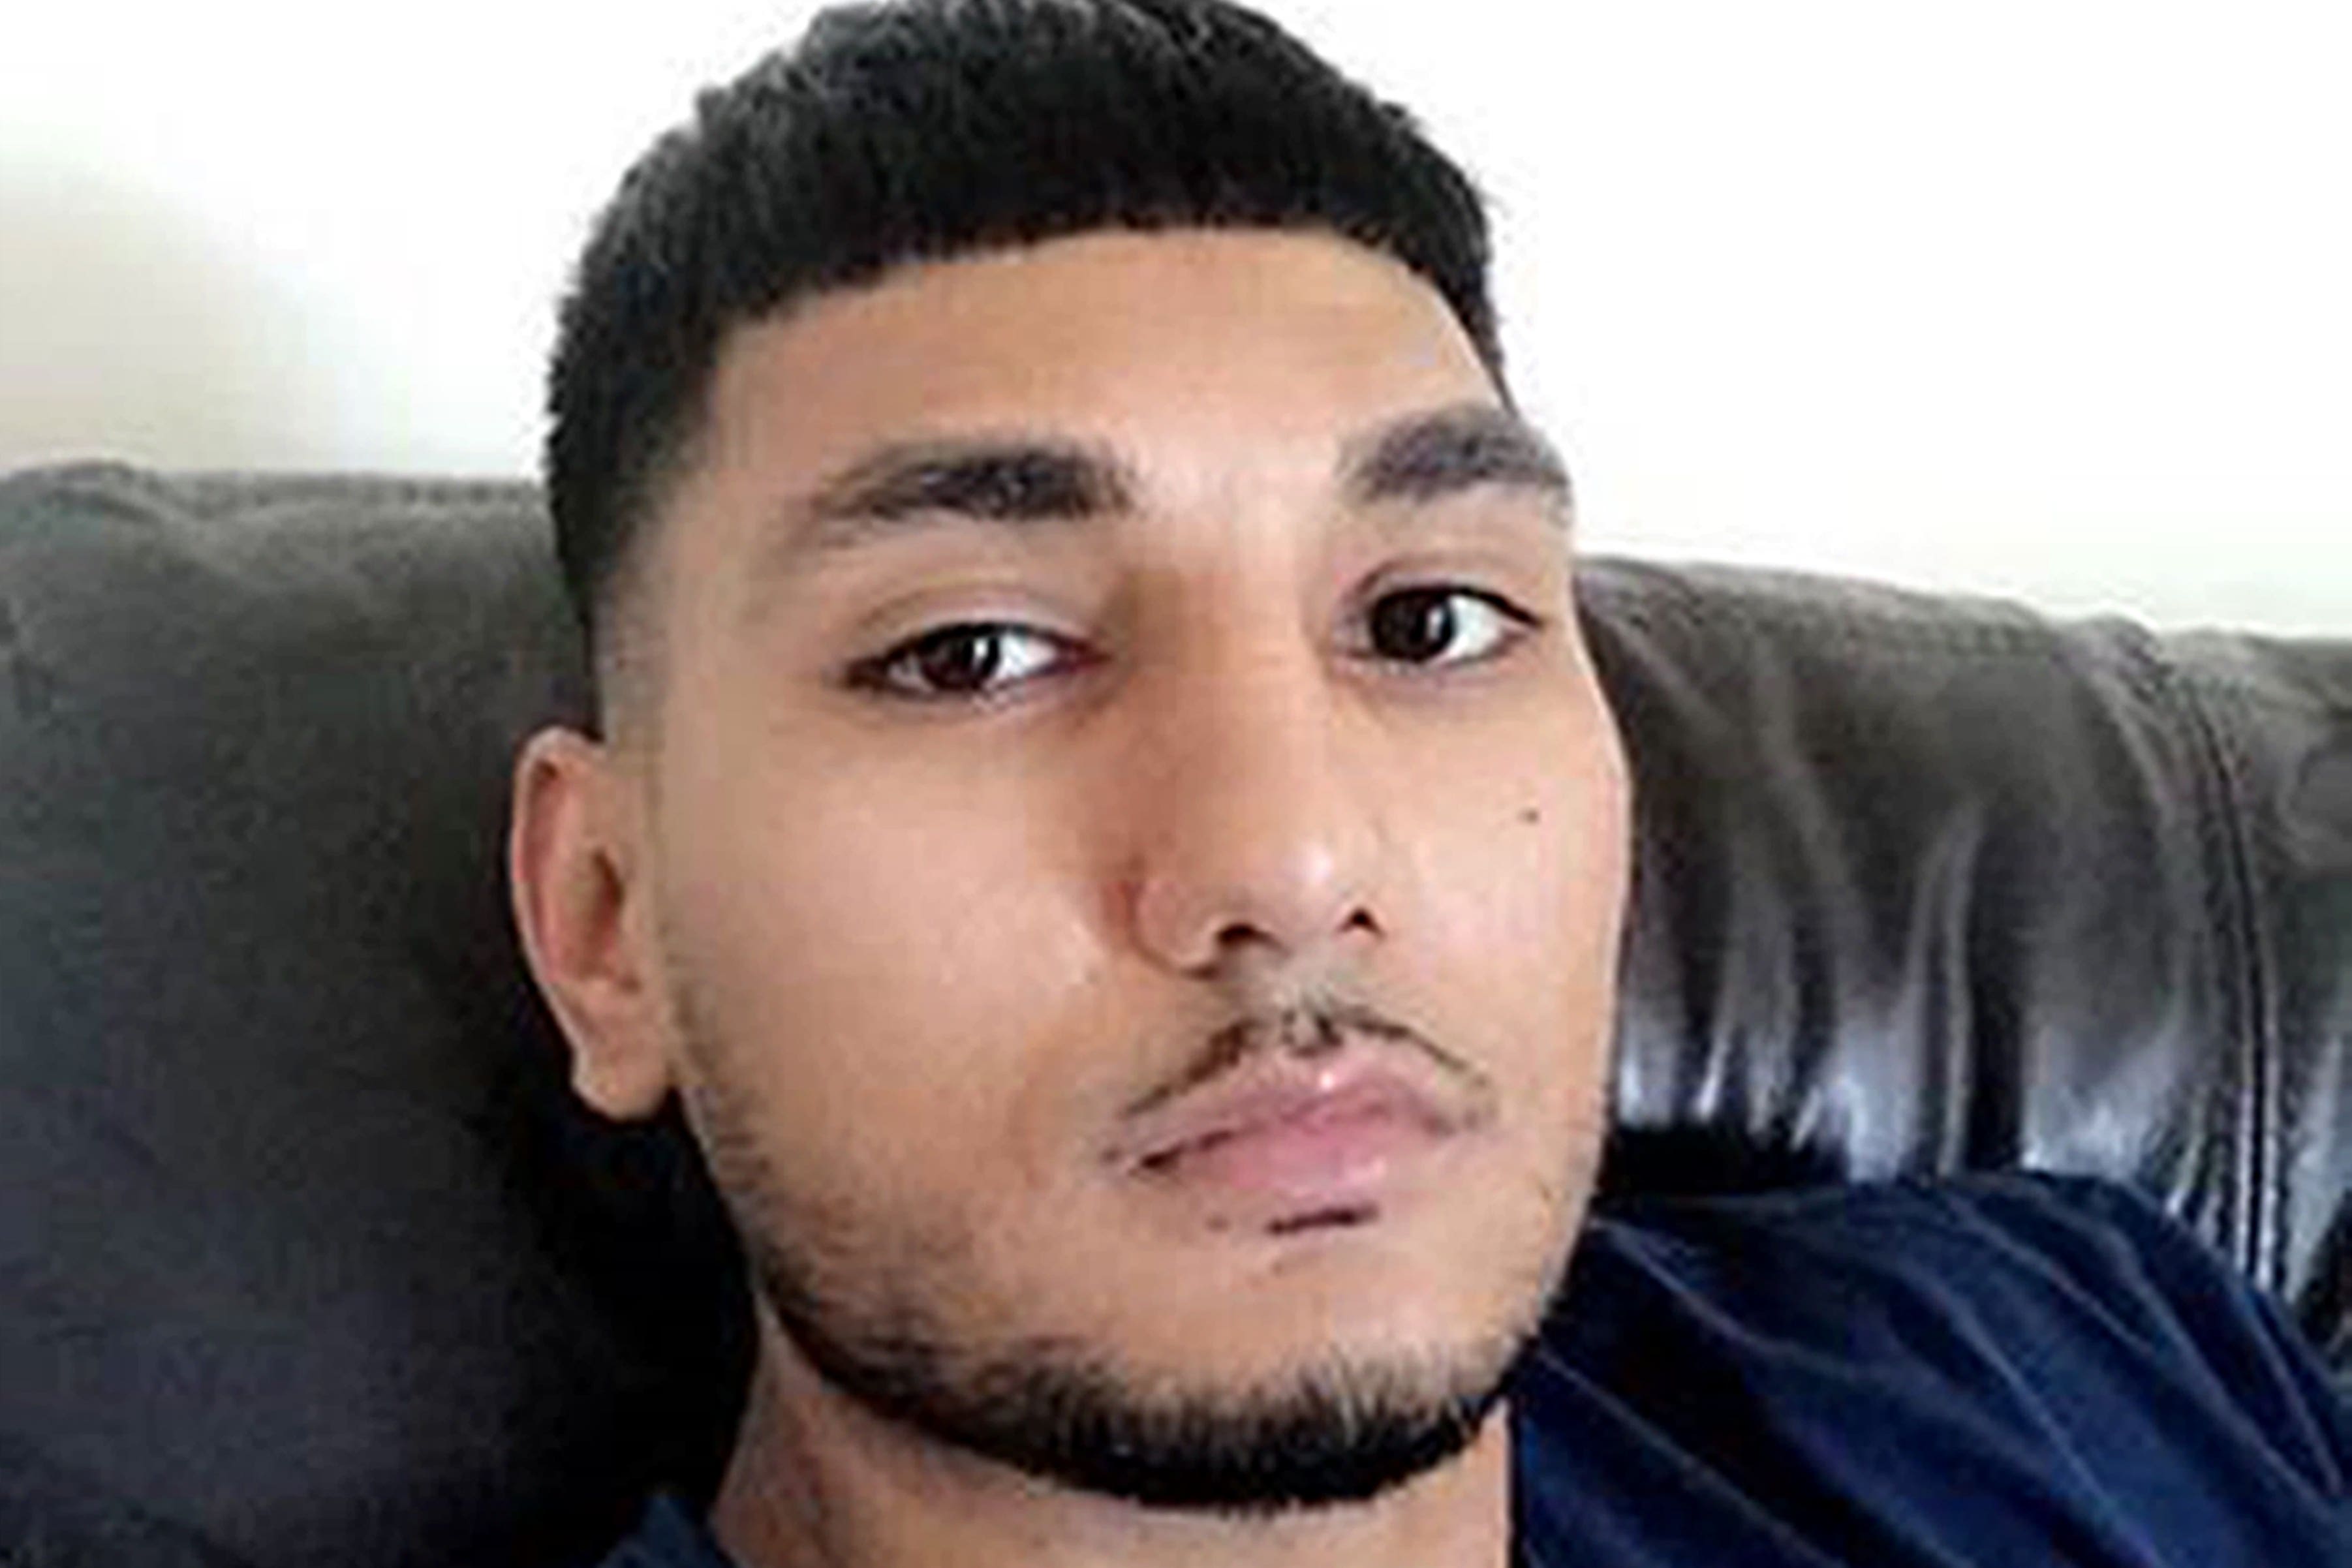 Mohammed Shah Subhani, known as Shah, was reported missing on May 7 2019 (Family/PA)